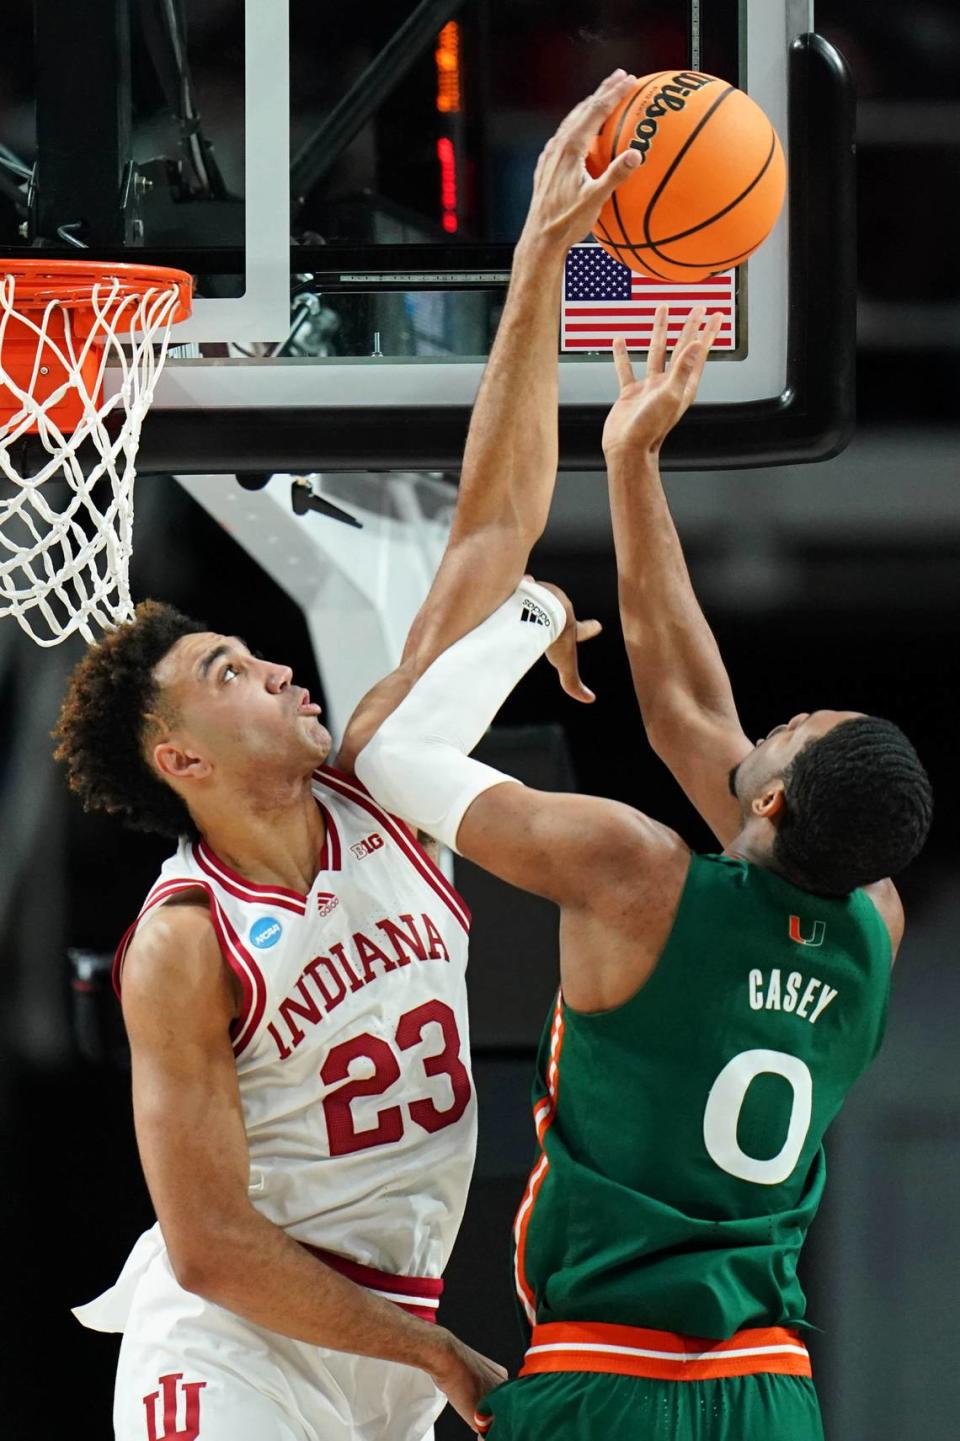 Indiana Hoosiers forward Trayce Jackson-Davis (23) blocks the shot of Miami (Fl) Hurricanes forward A.J. Casey (0) during the first half March 19, 2023, at MVP Arena in Albany, New York. David Butler II/USA TODAY Sports